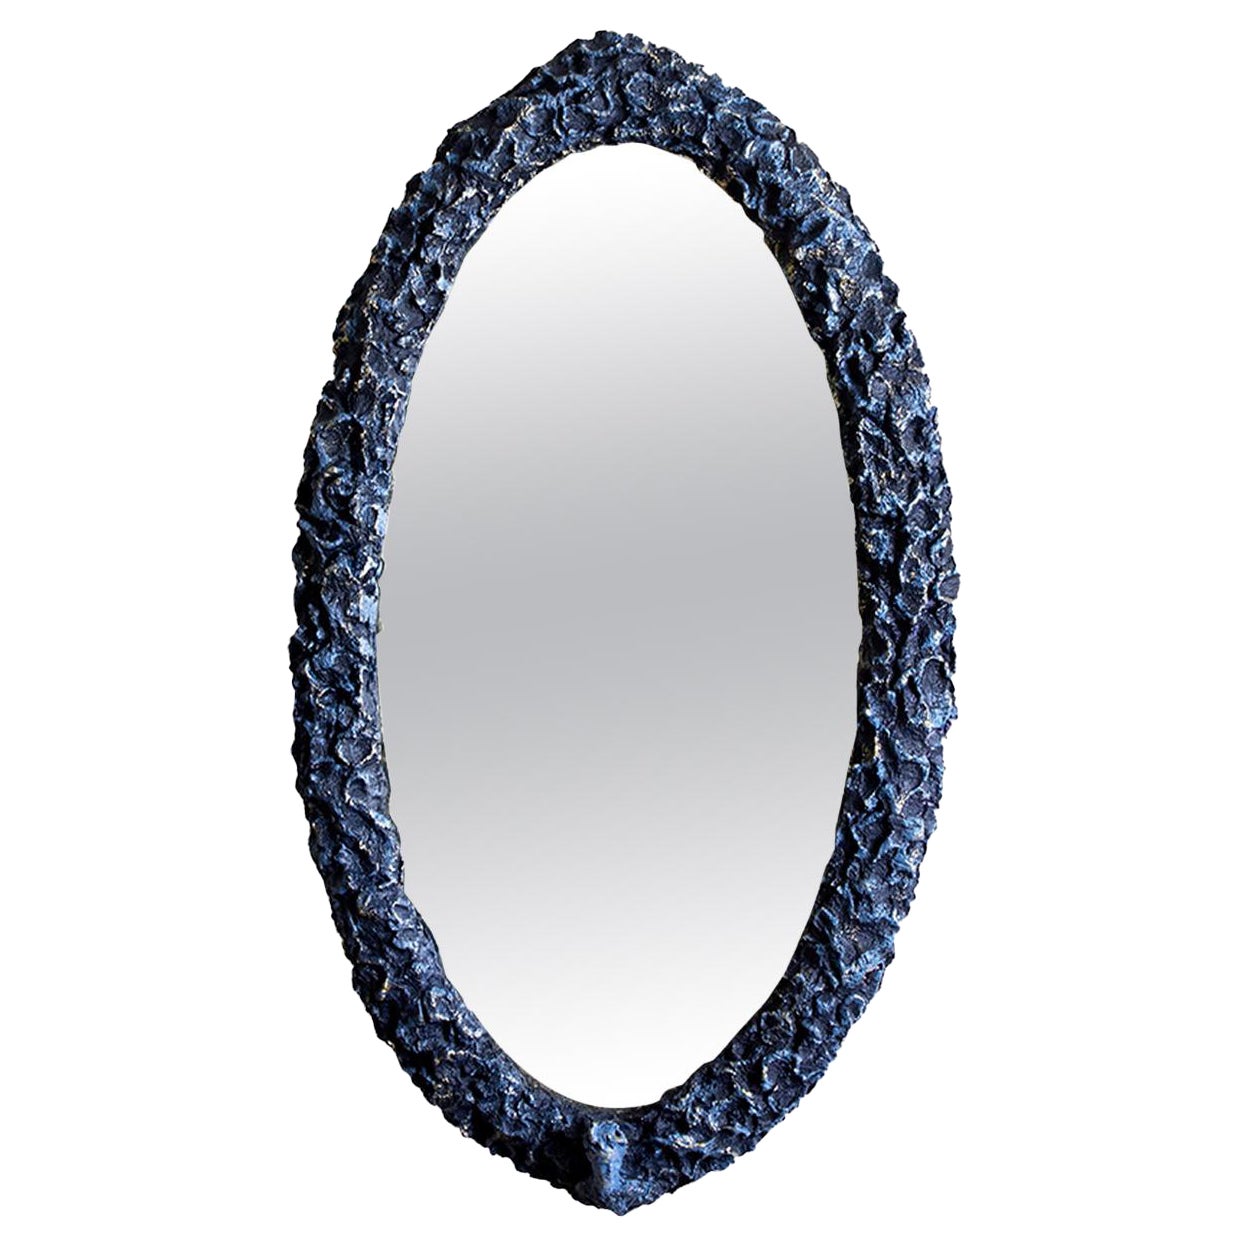 Contemporary Oval Sculpted Mirror in Slate Grey by Margit Wittig For Sale